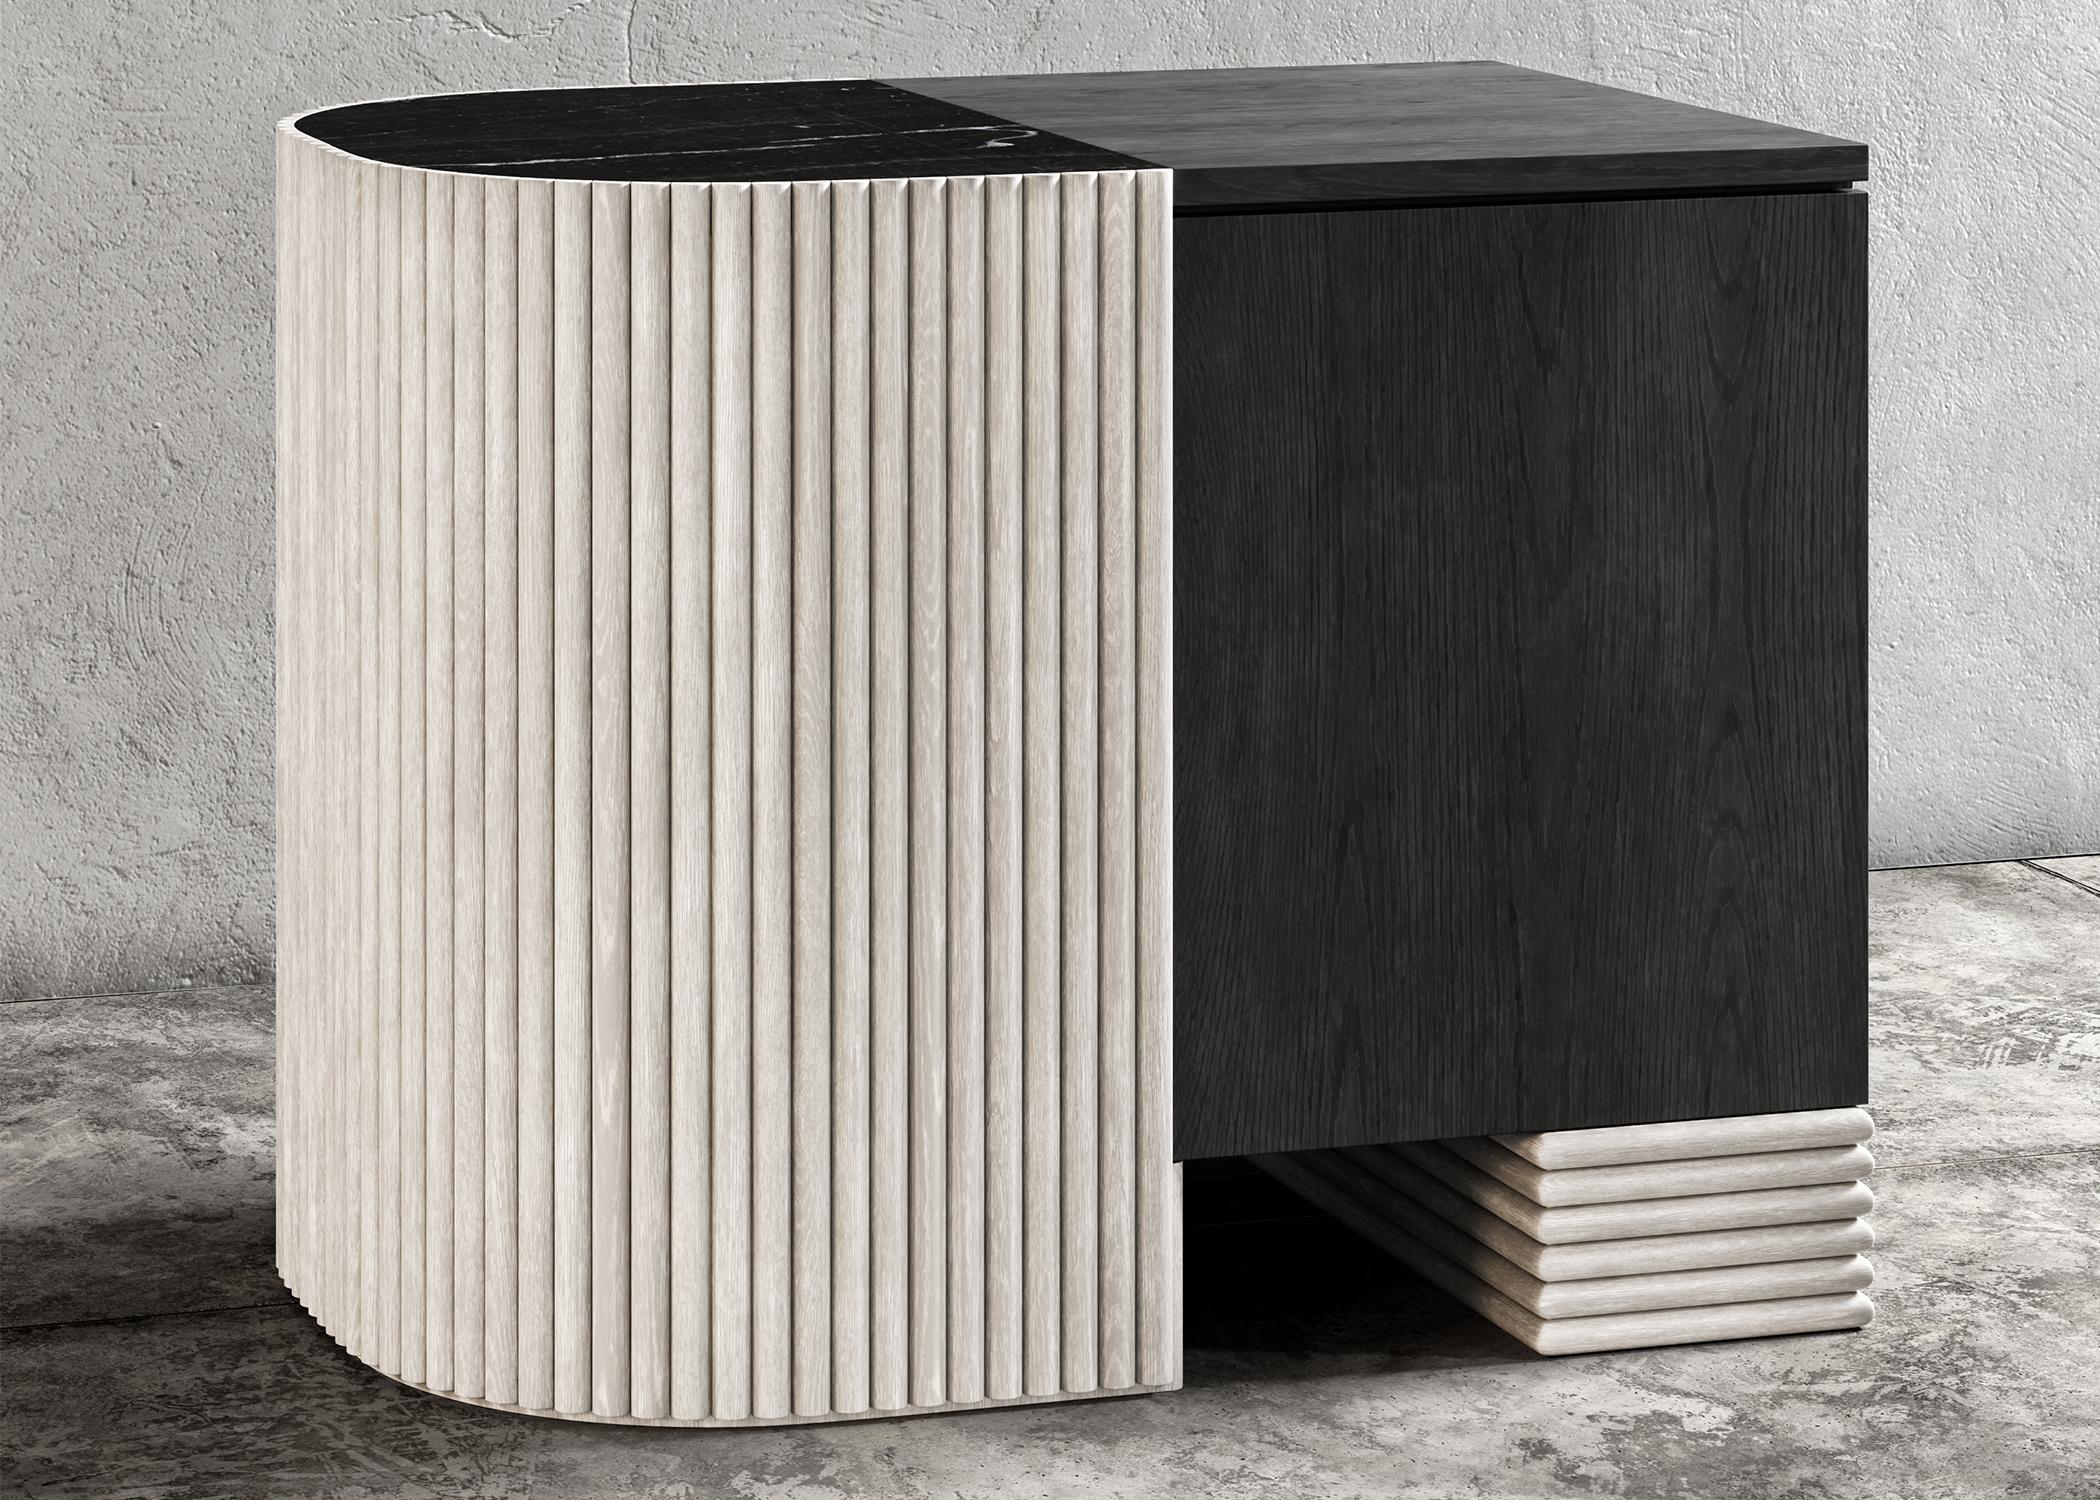 SWAY NIGHTSTAND - Modern Design with Sandy & Ebony Oak + Nero Marquina Marble

The Sway Nightstand is a beautiful and modern piece of furniture that will elevate the style of any bedroom. Crafted from high-quality Sandy Oak and Ebony Oak wood, the